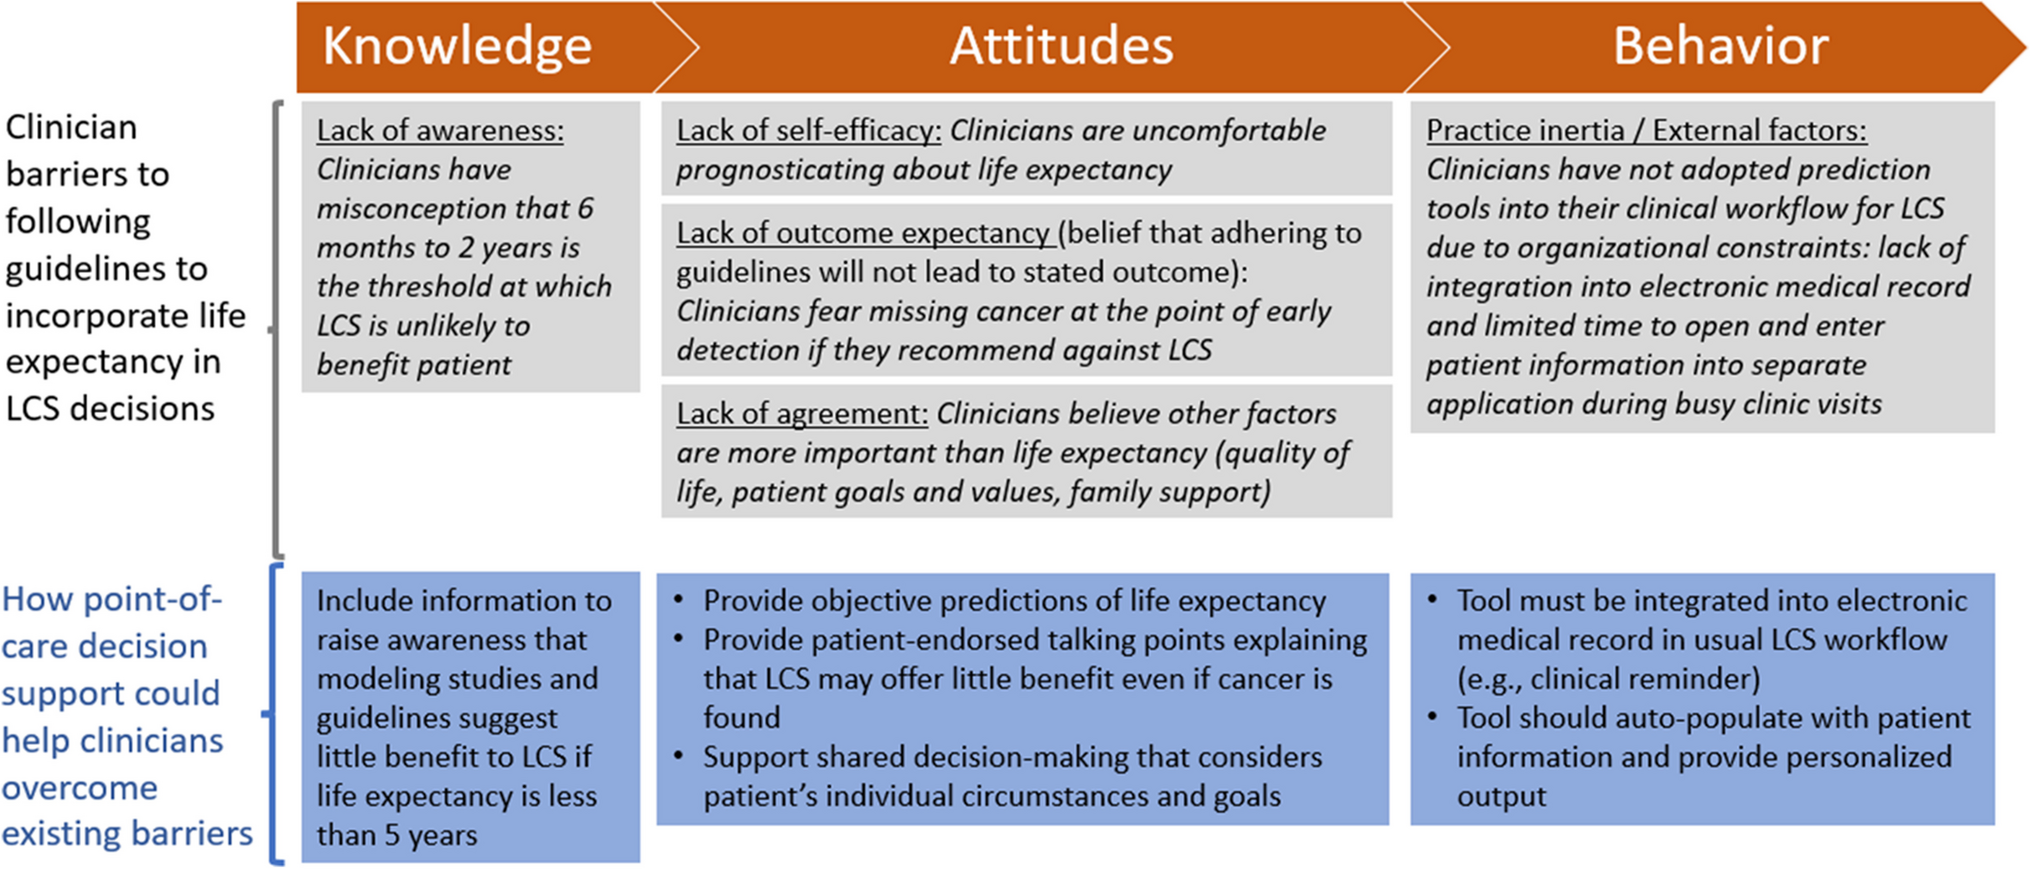 Tackling Guideline Non-concordance: Primary Care Barriers to Incorporating Life Expectancy into Lung Cancer Screening Decision-Making—A Qualitative Study